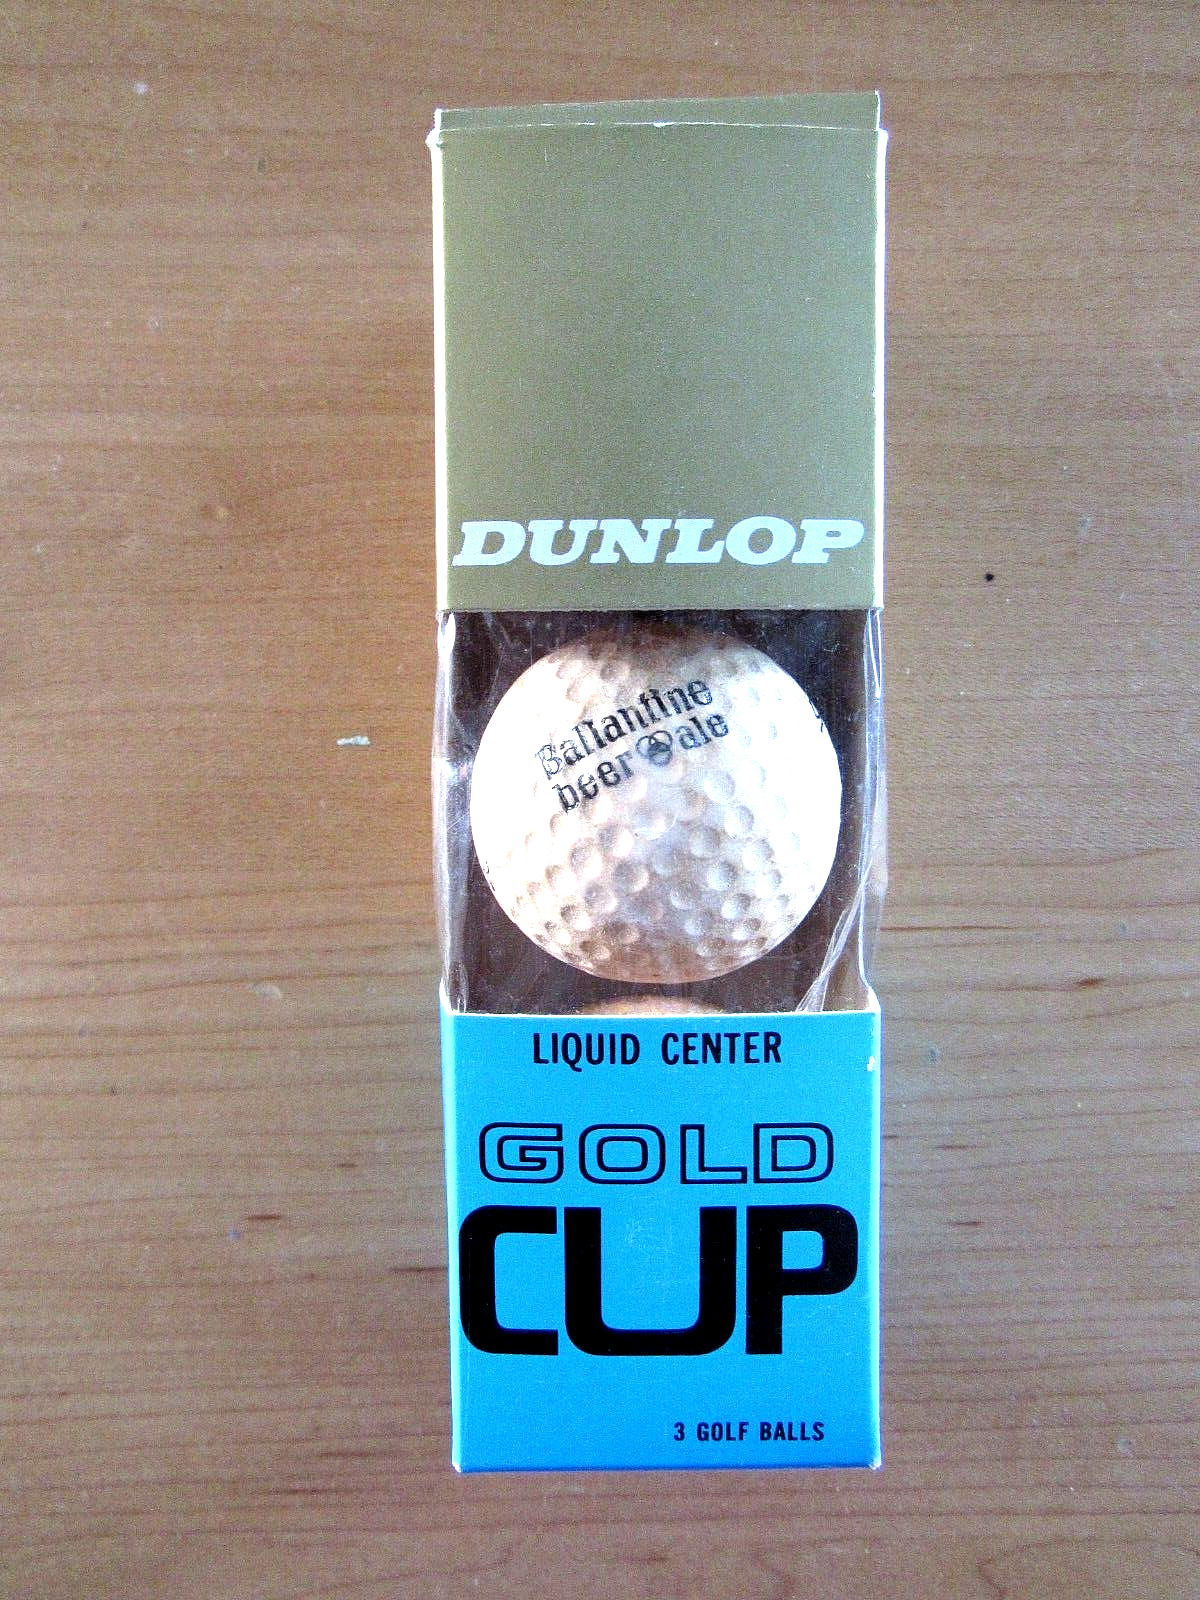 VINTAGE BALLANTINE BEER PROMO GOLF BALLS BY DUNLOP TIRE AND RUBBER GOLD CUP RARE